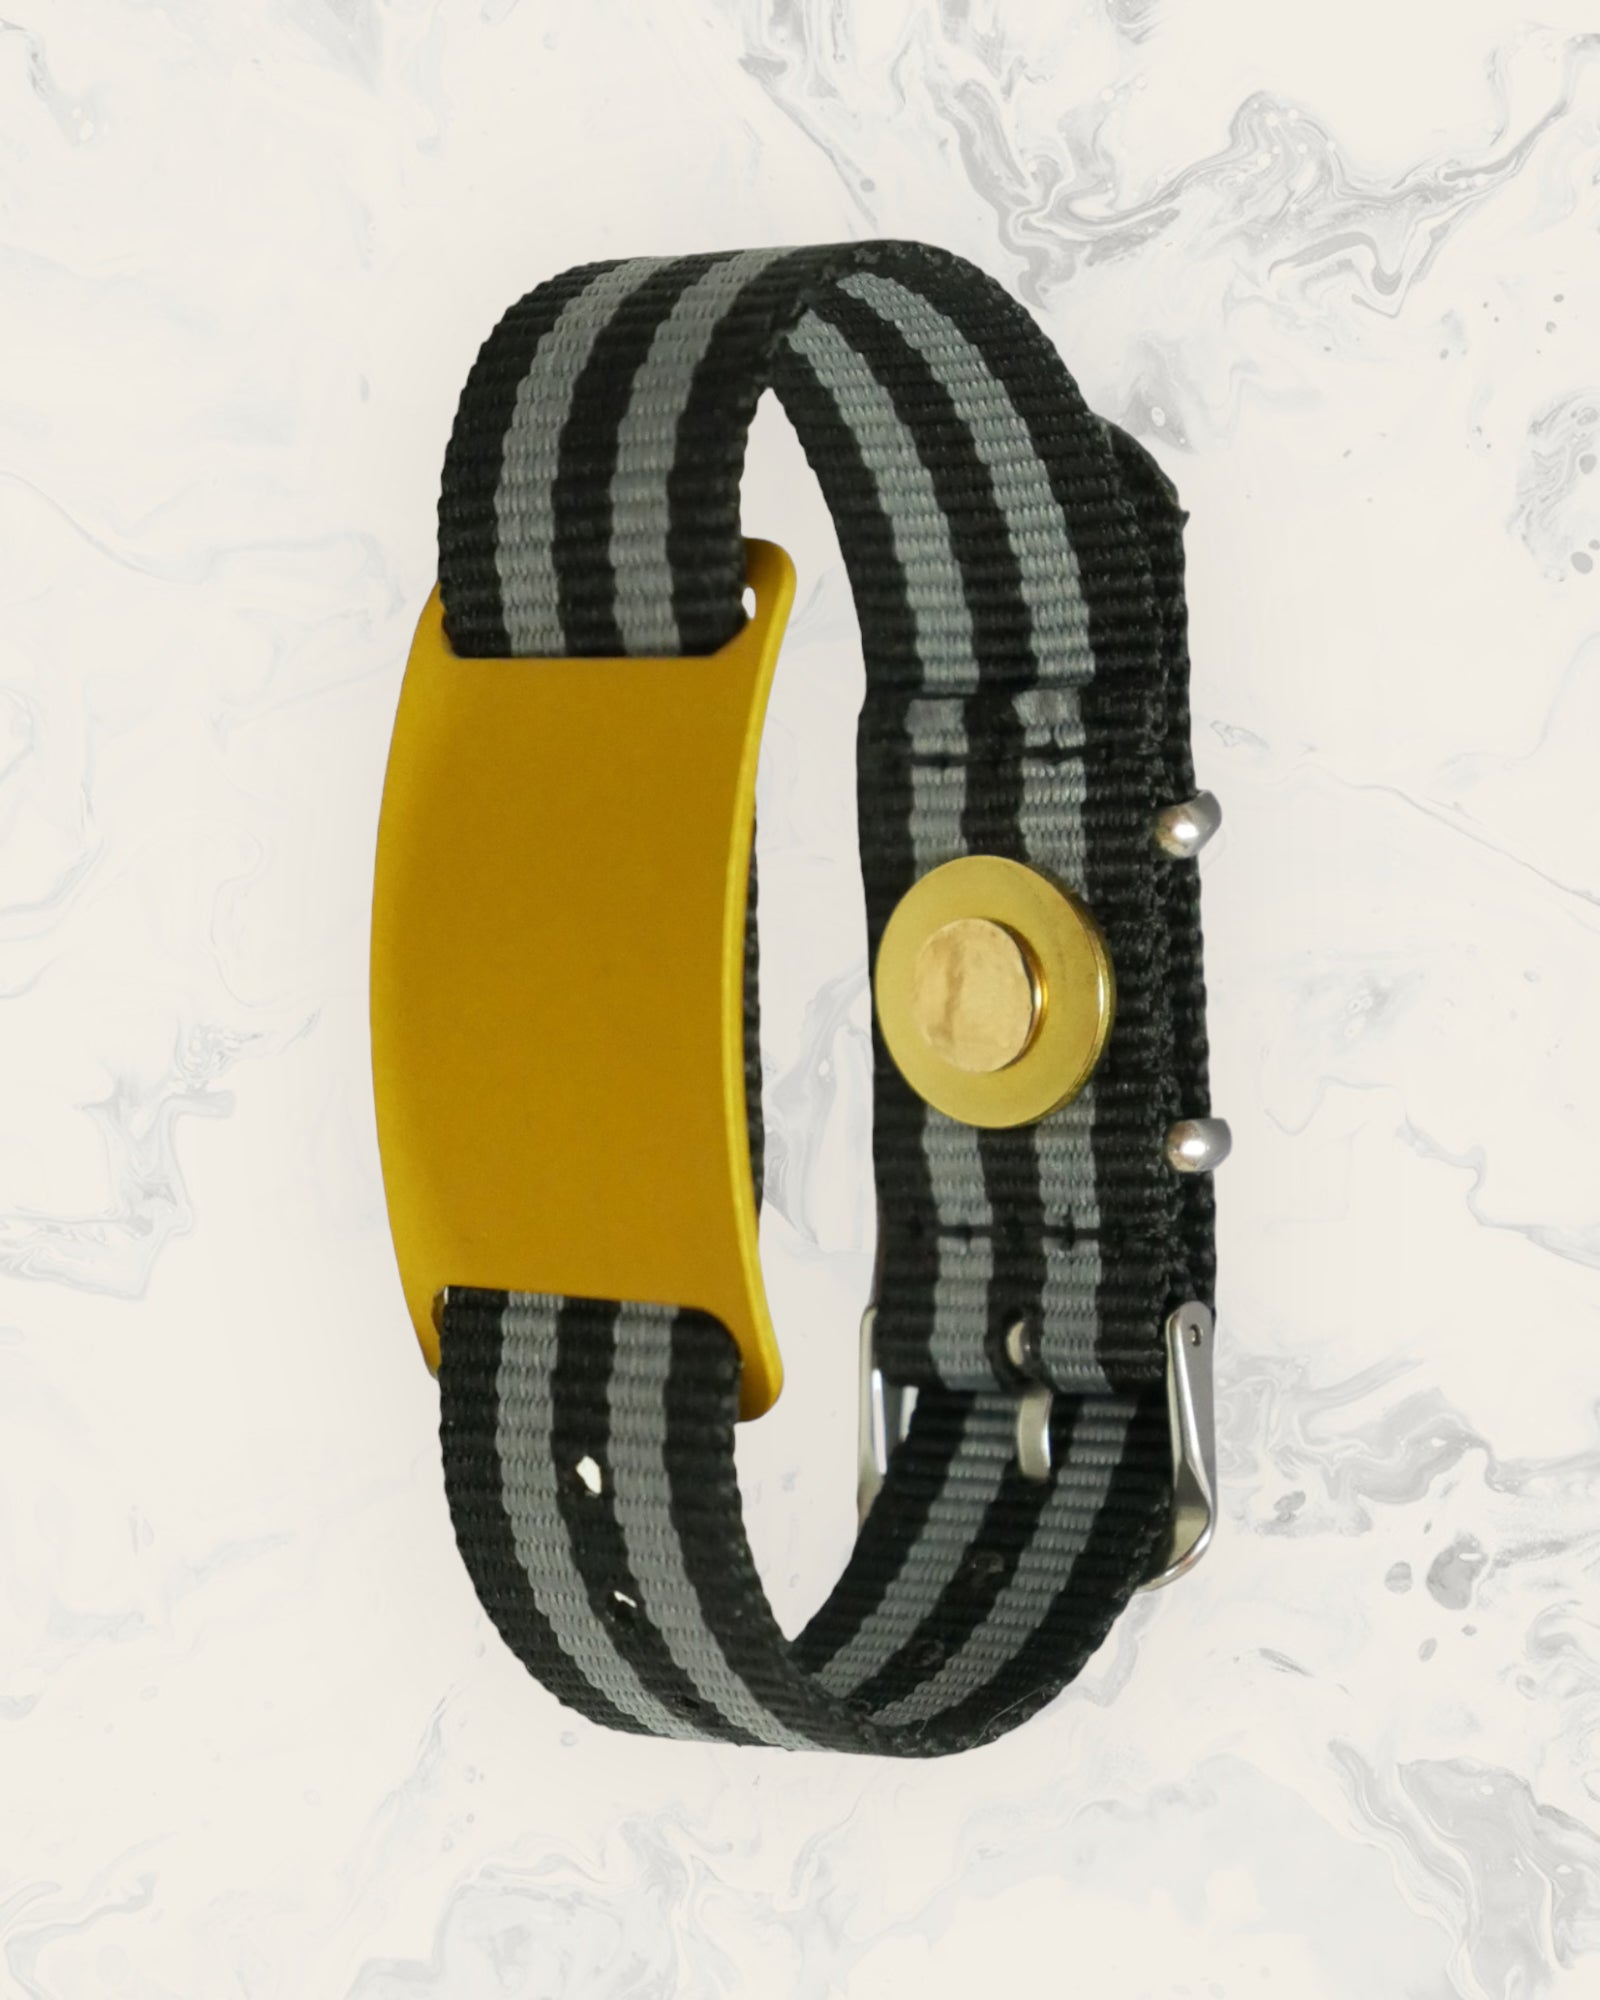 Natural Pain Relief and EMF Protection Bracelet Nylon Band Color Black and Gray Striped with a Gold Slider